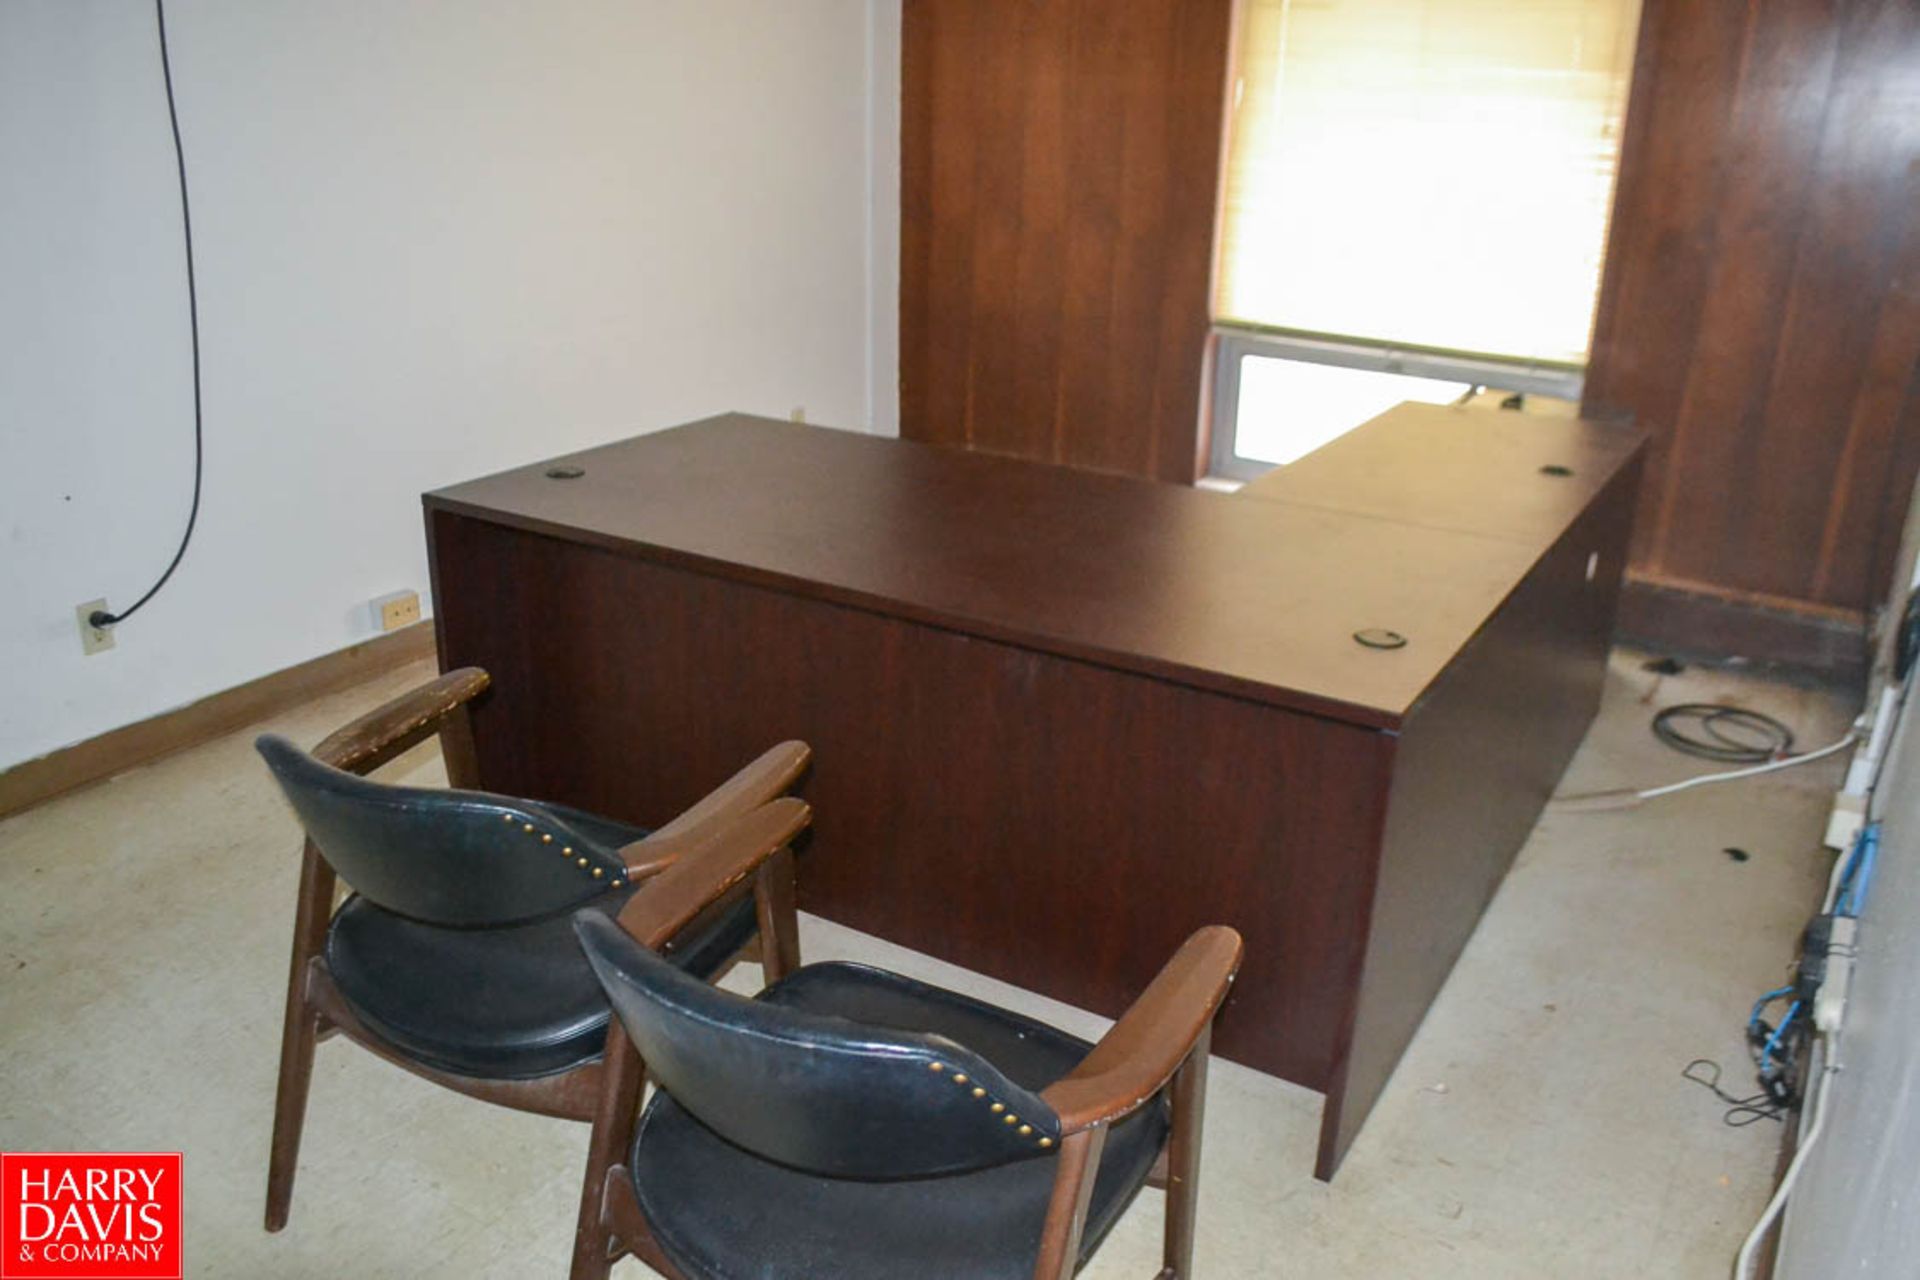 Contents of office with (6) 3 drawer file cabinets; Composite wood grain L shaped desk mini